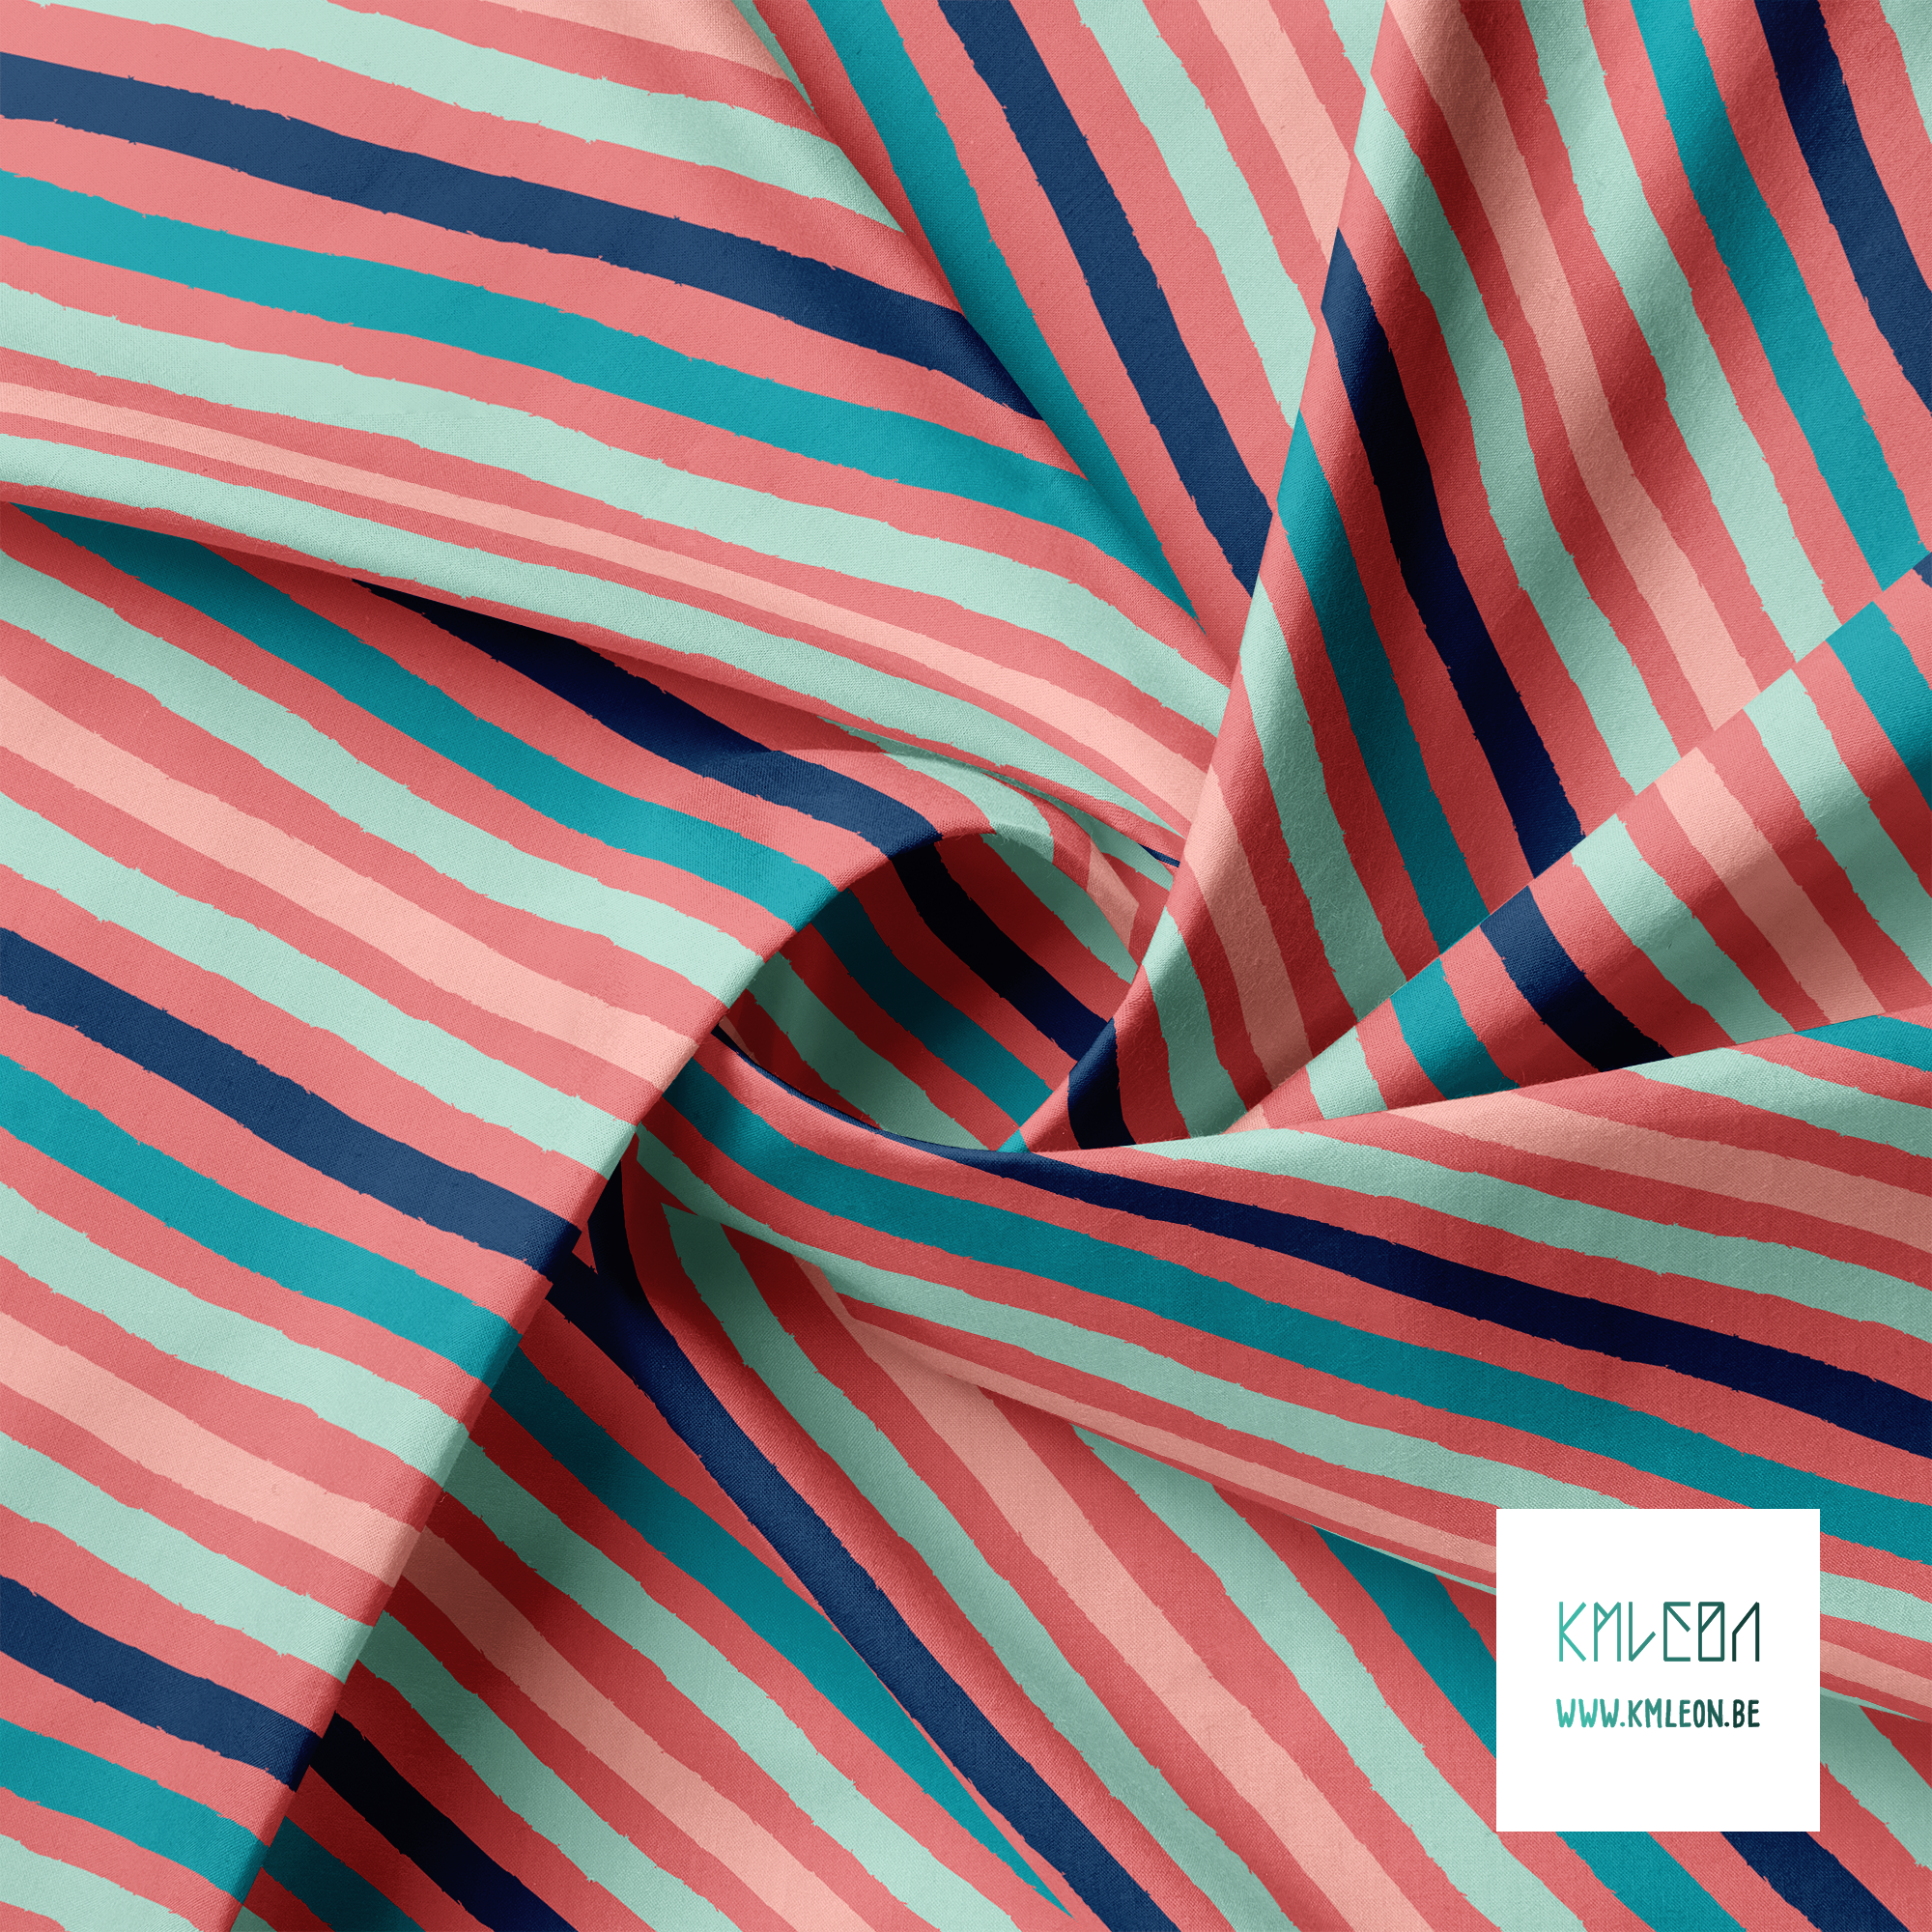 Pink, mint green, navy and teal stripes fabric